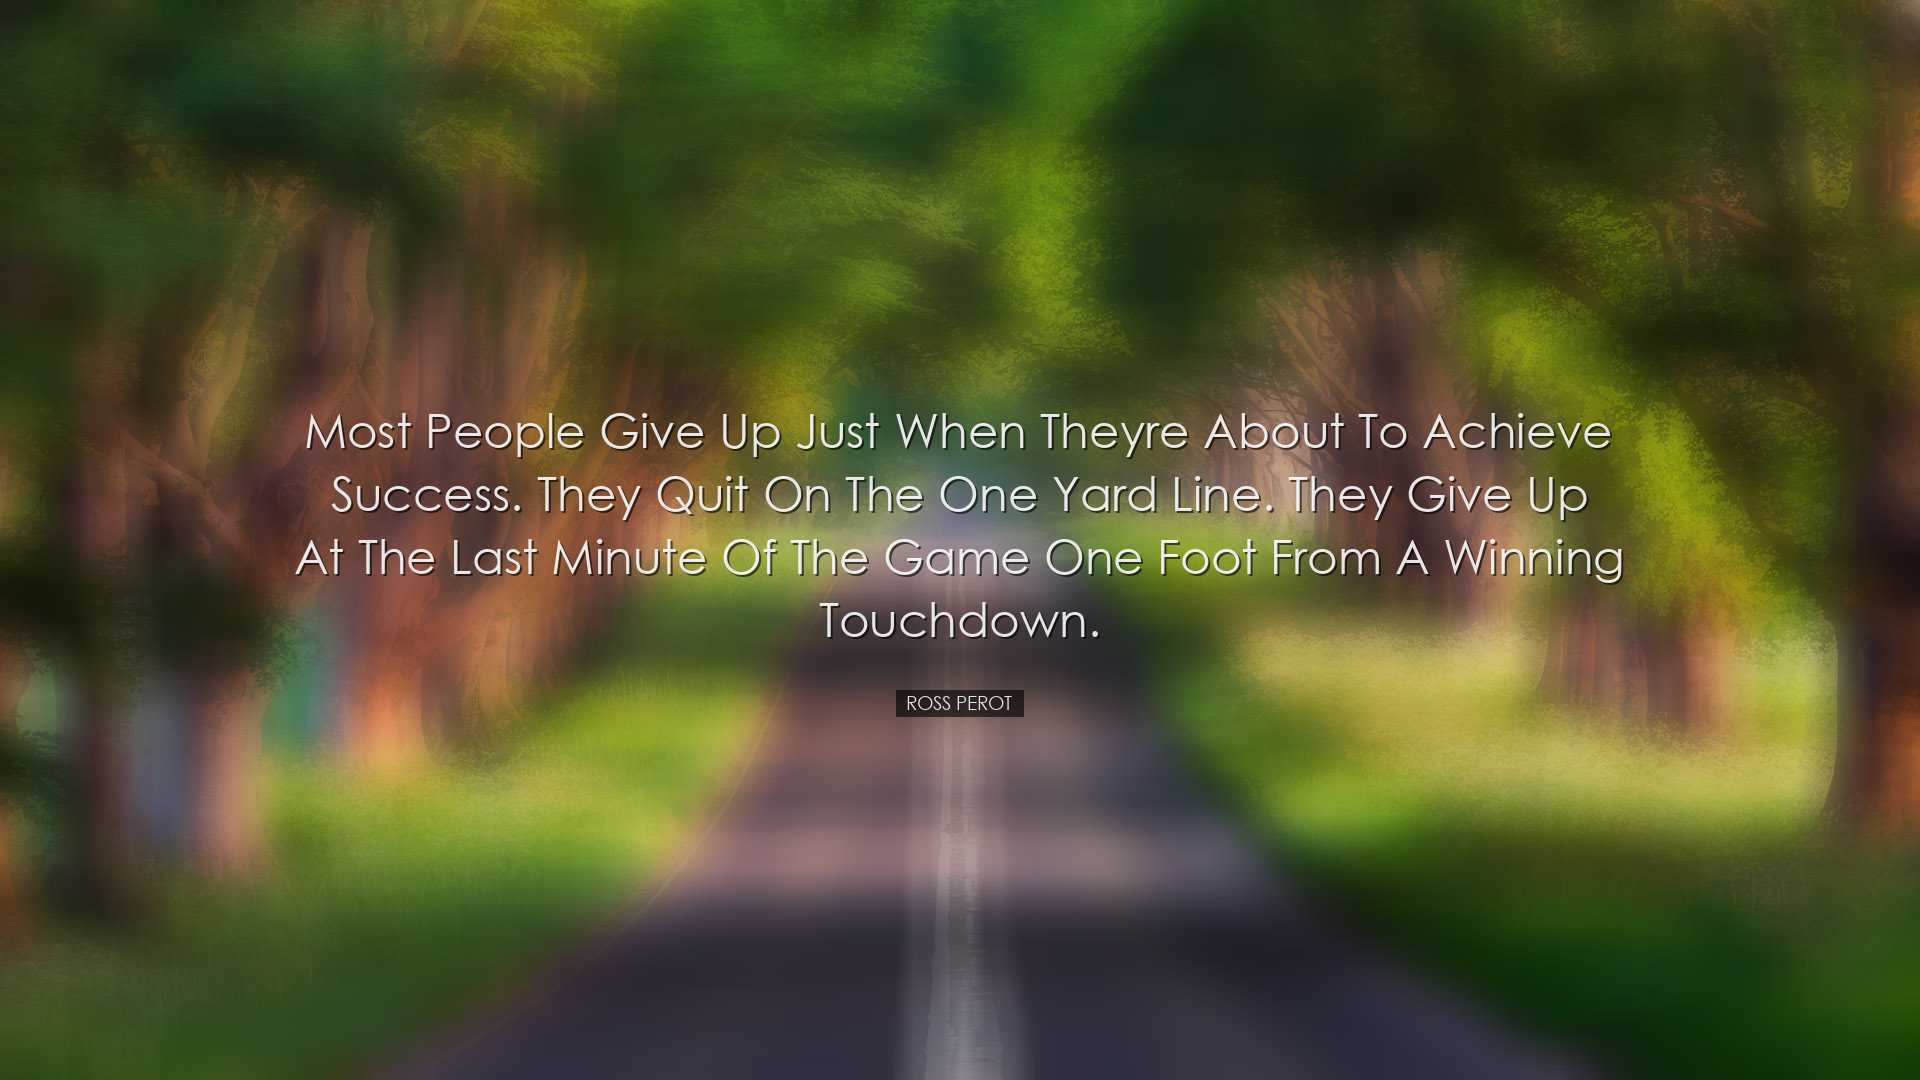 Most people give up just when theyre about to achieve success. The